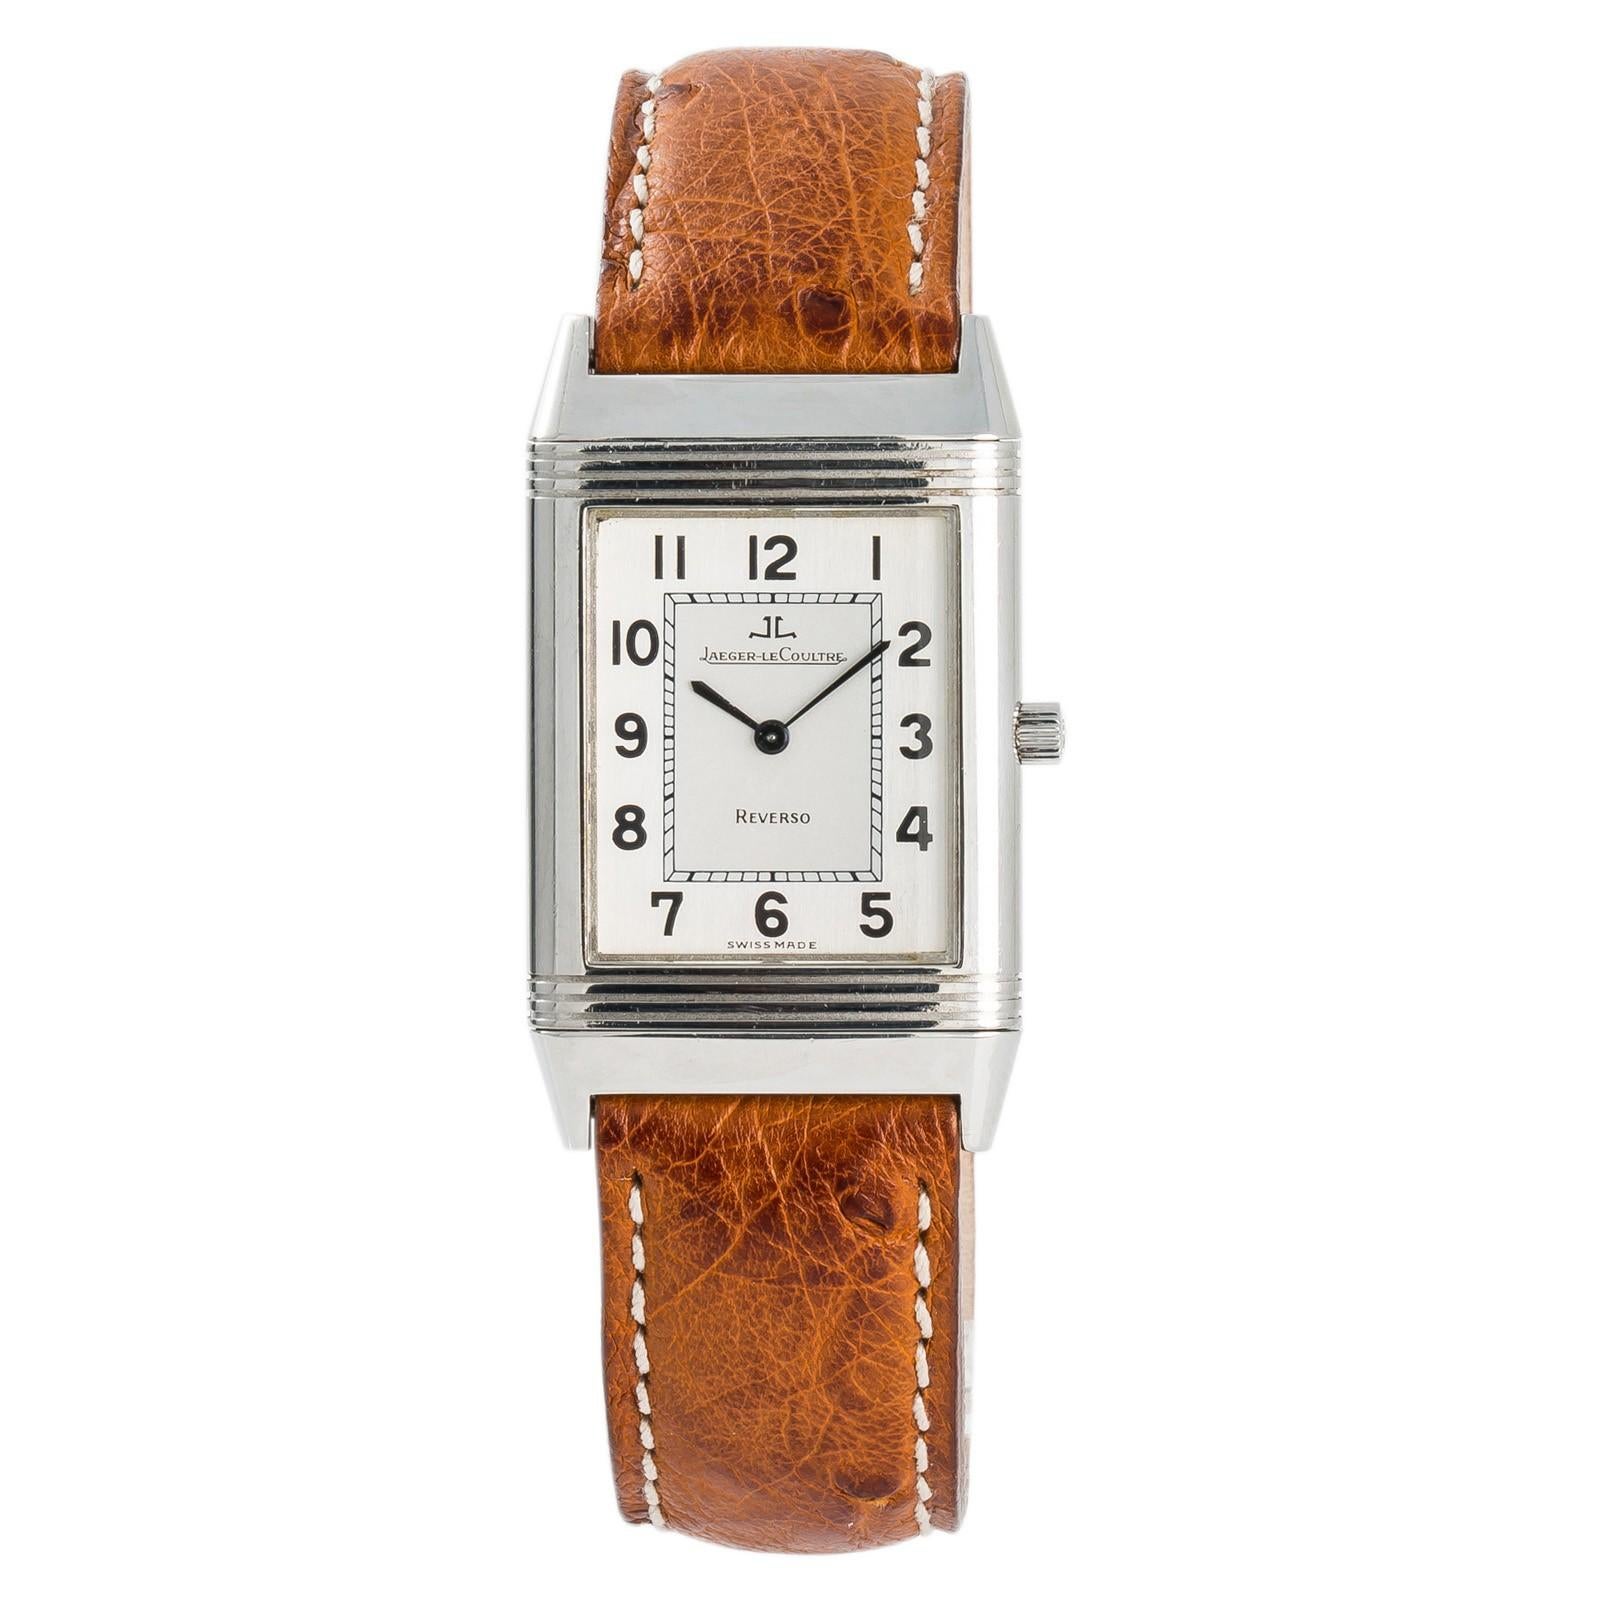 Jaeger LeCoultre Reverso 250.8.86, Certified Authentic